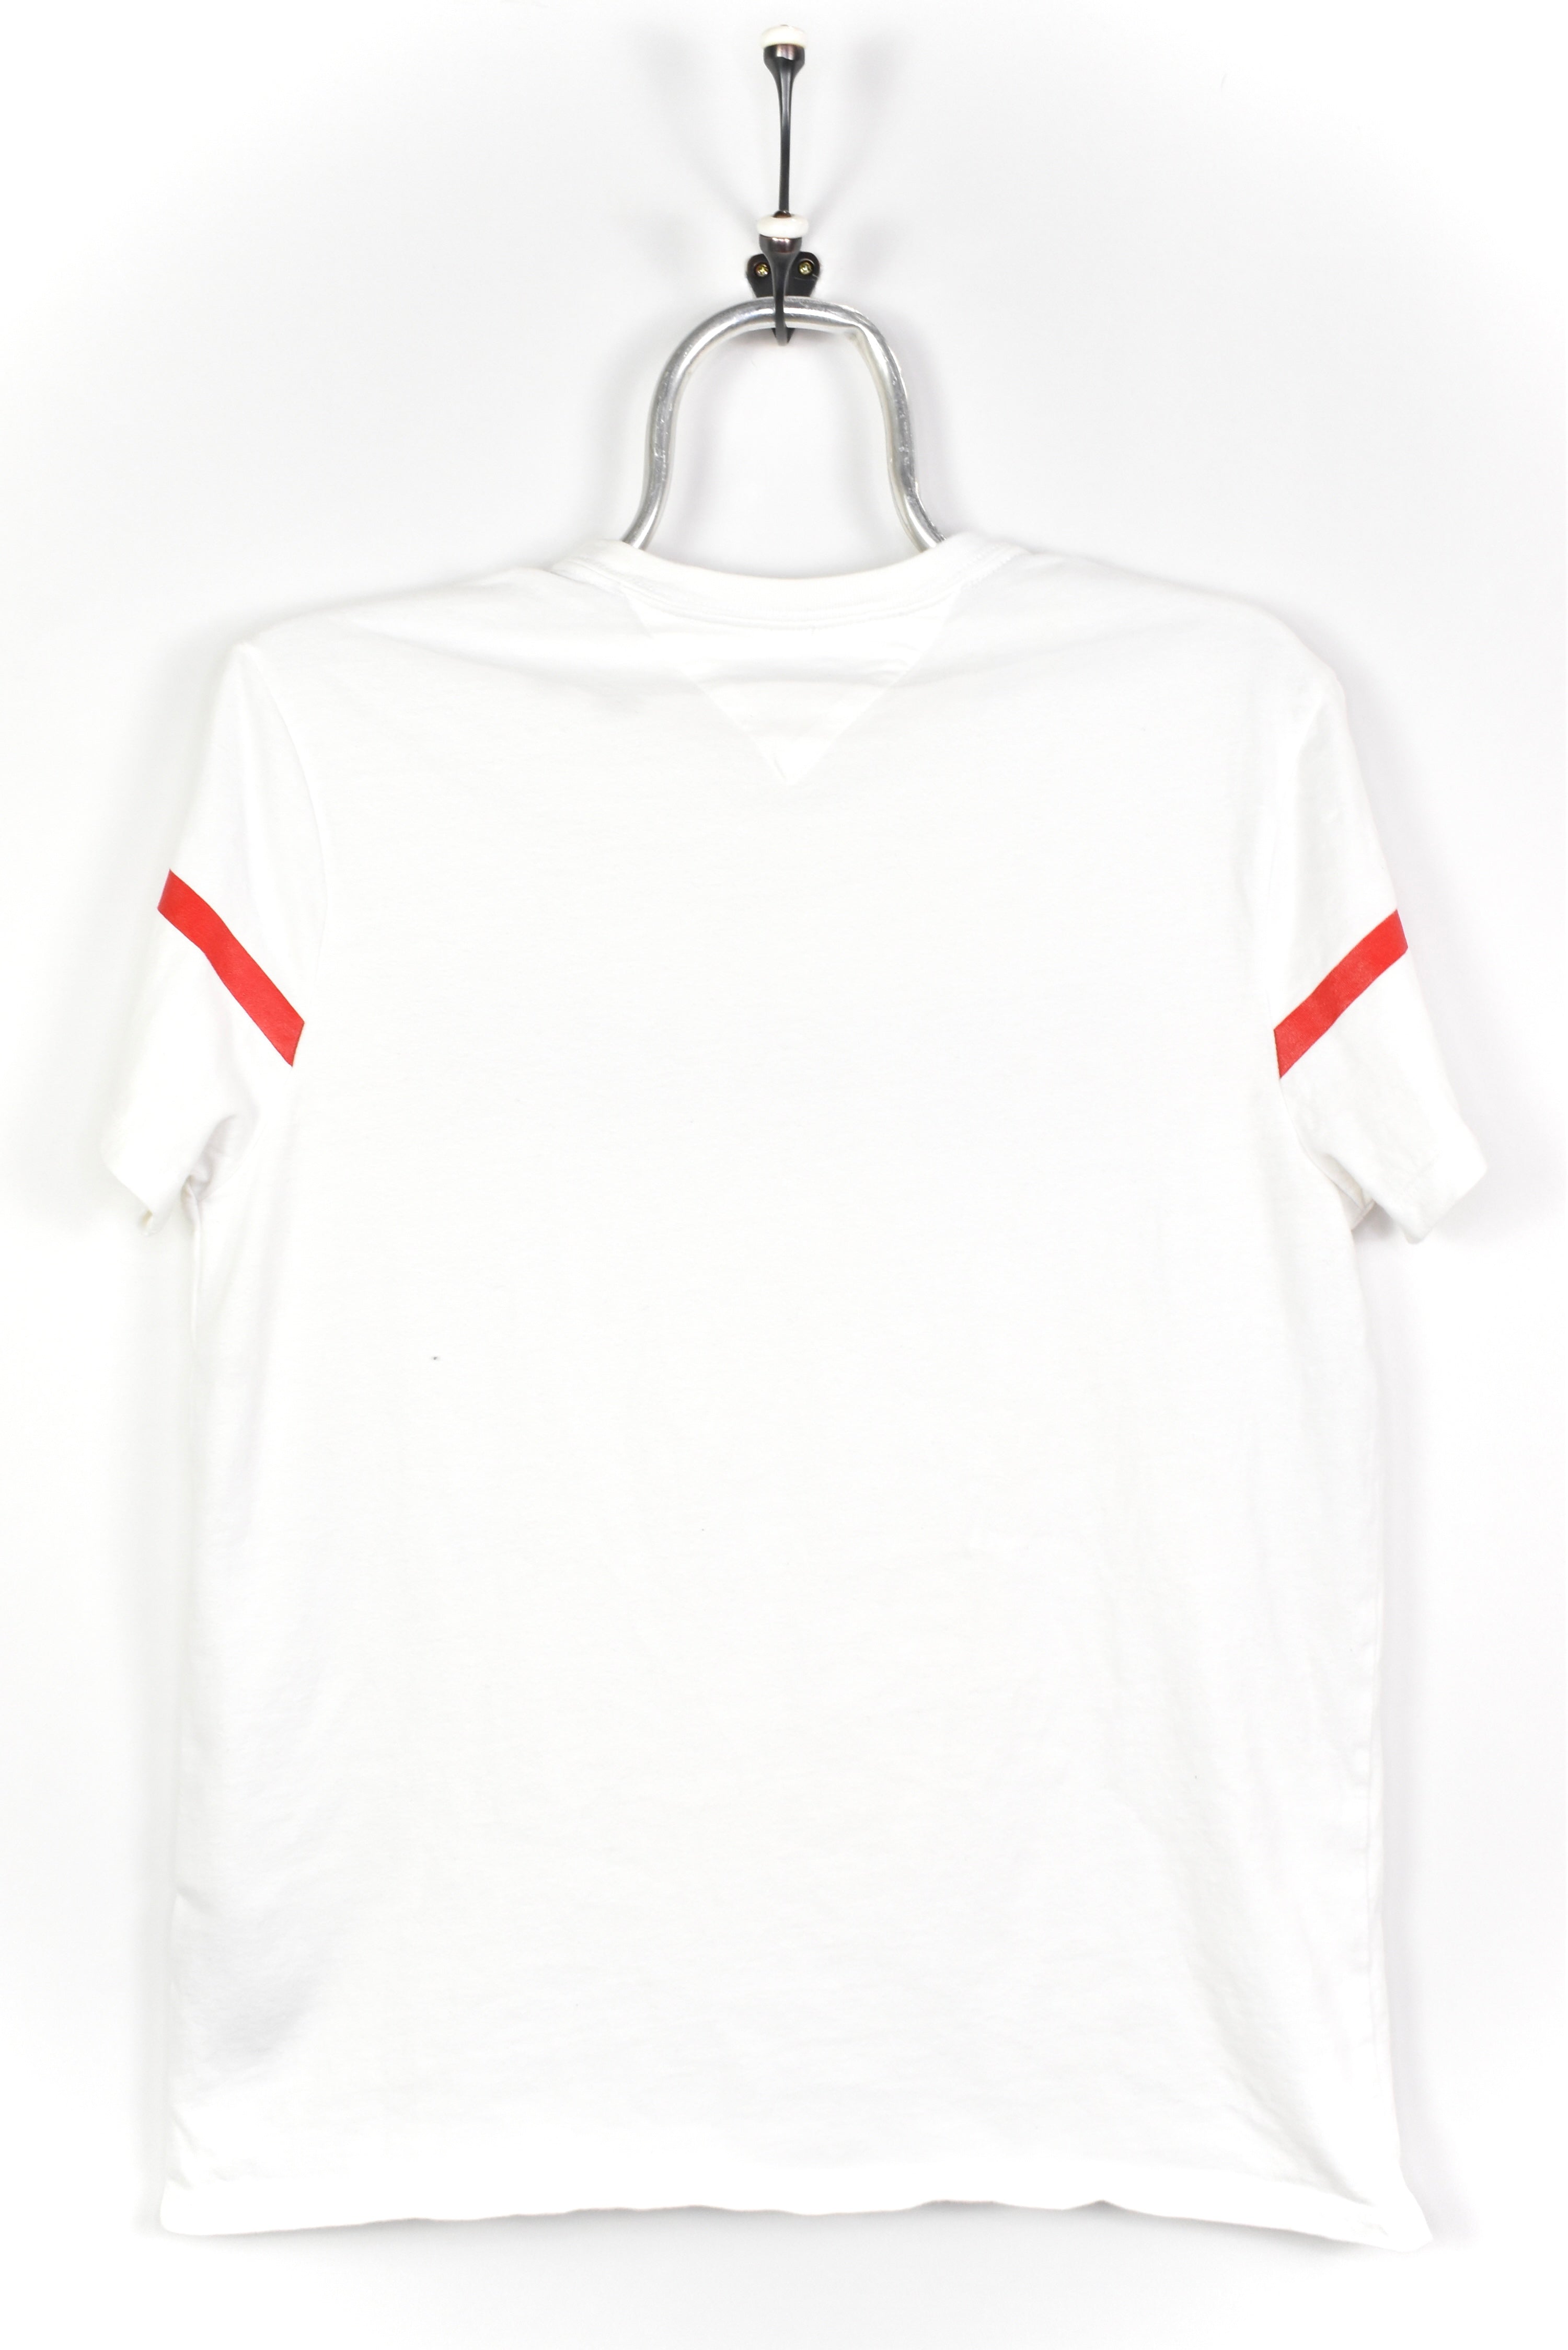 TOMMY HILFIGER WHITE T-SHIRT | SMALL TOMMY HILFIGER